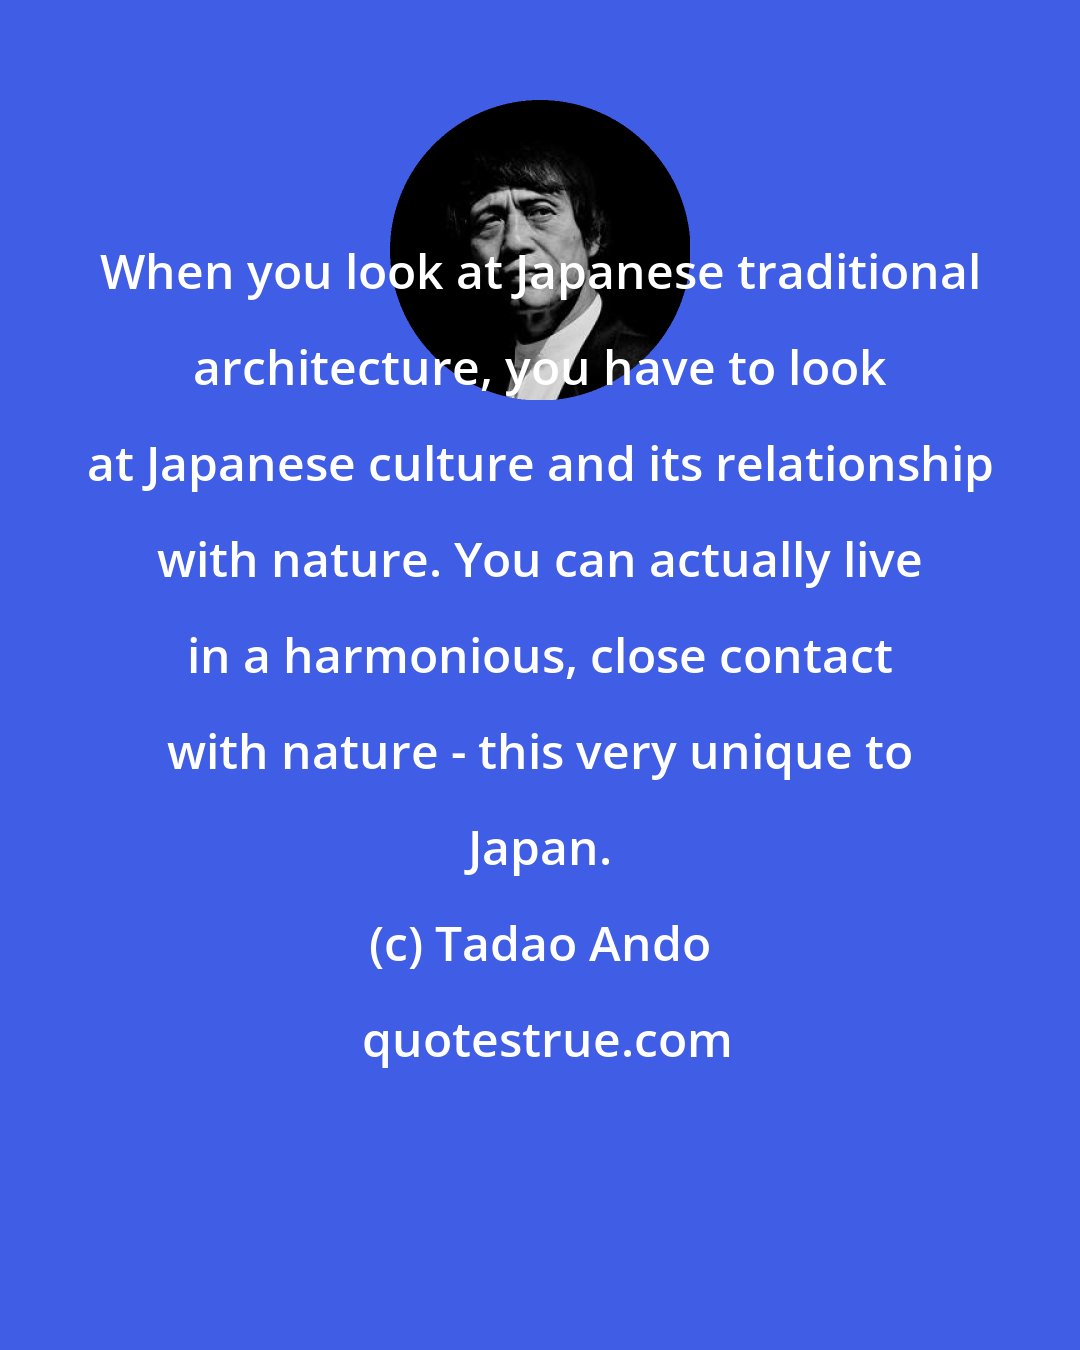 Tadao Ando: When you look at Japanese traditional architecture, you have to look at Japanese culture and its relationship with nature. You can actually live in a harmonious, close contact with nature - this very unique to Japan.